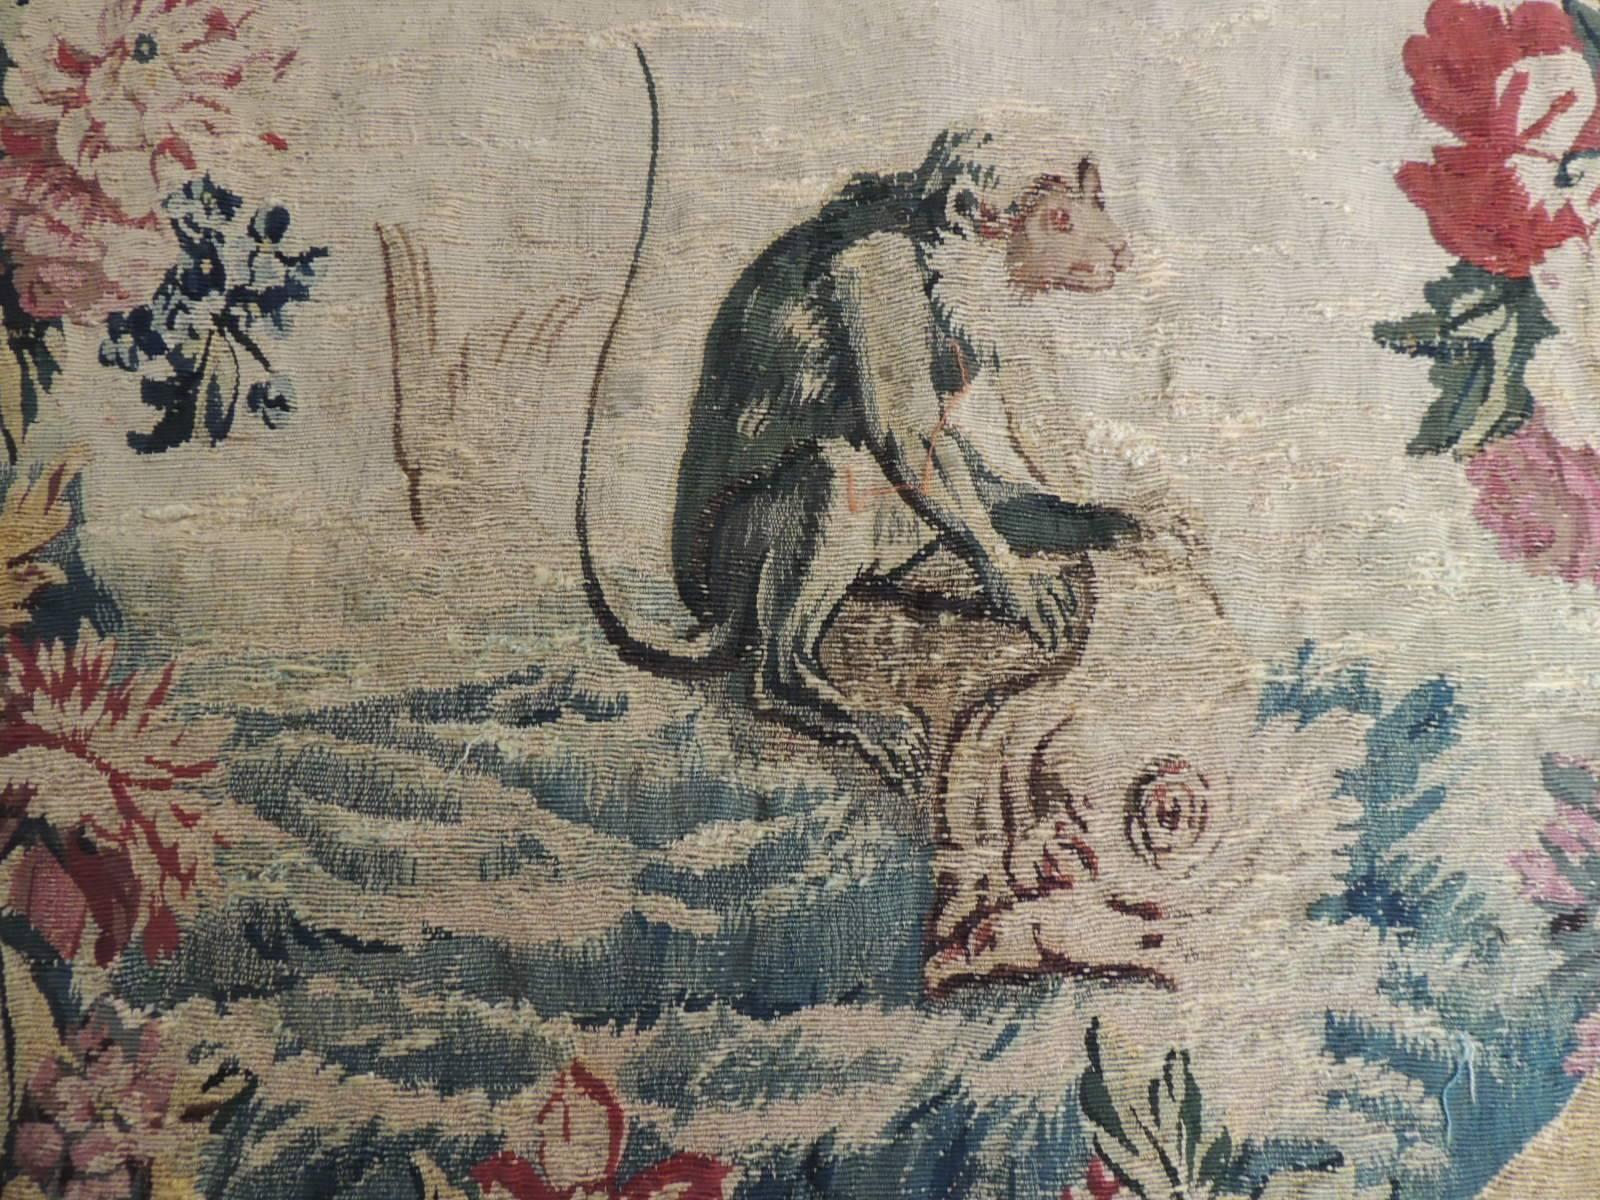 19th century Aubusson monkey motif tapestry fragment.
Ideal for hanging and frame.
Size: 26 x 29.
  